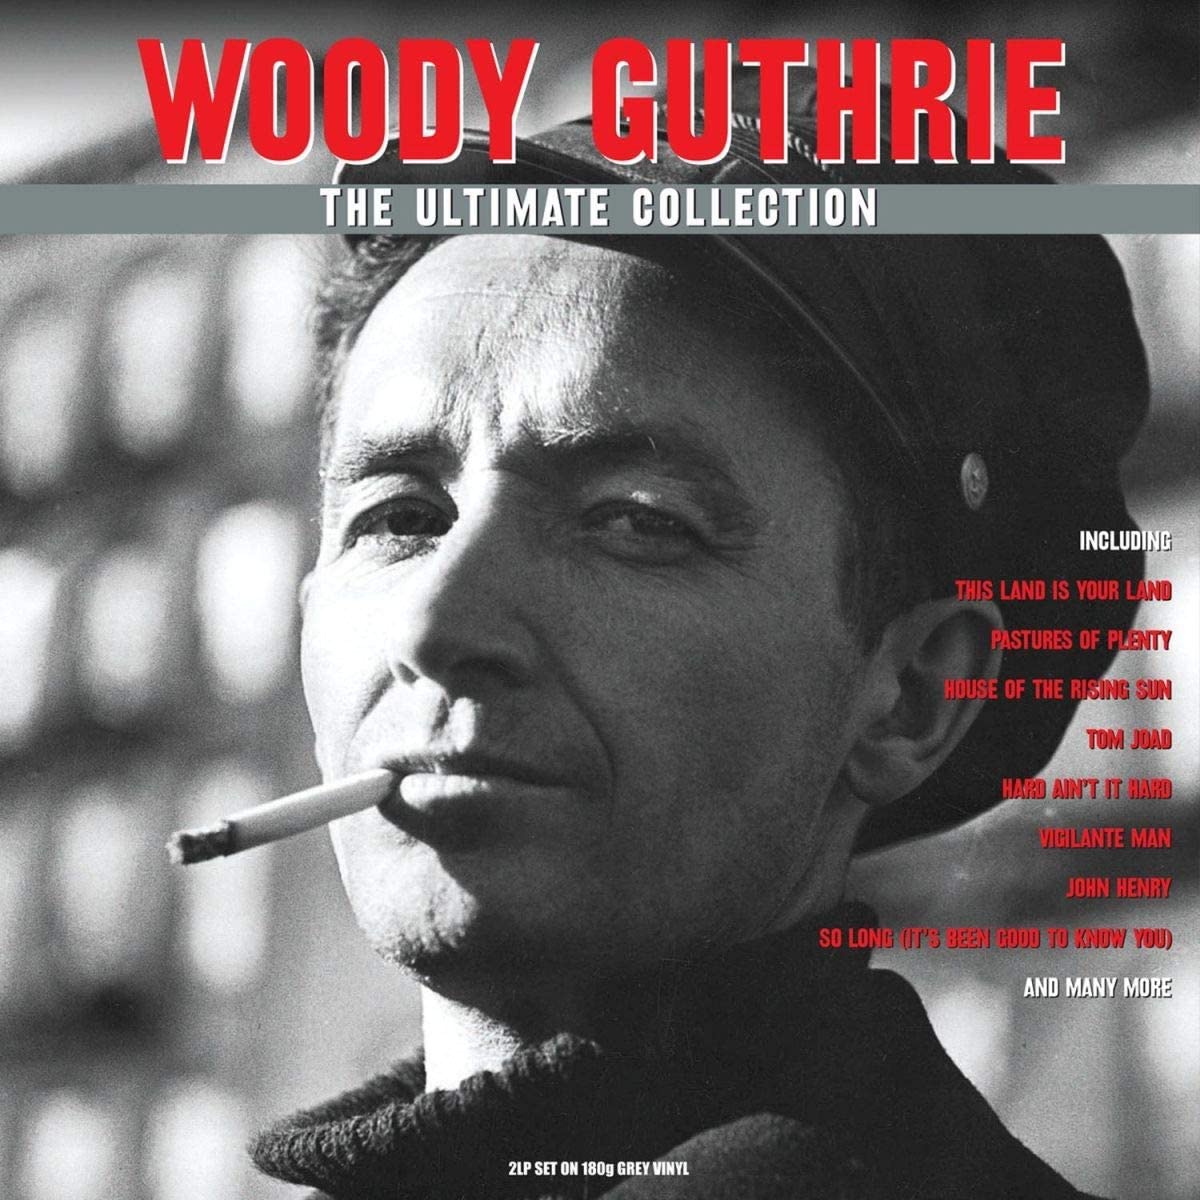 THE ULTIMATE COLLECTION - WOODY GUTHRIE [VINYL]